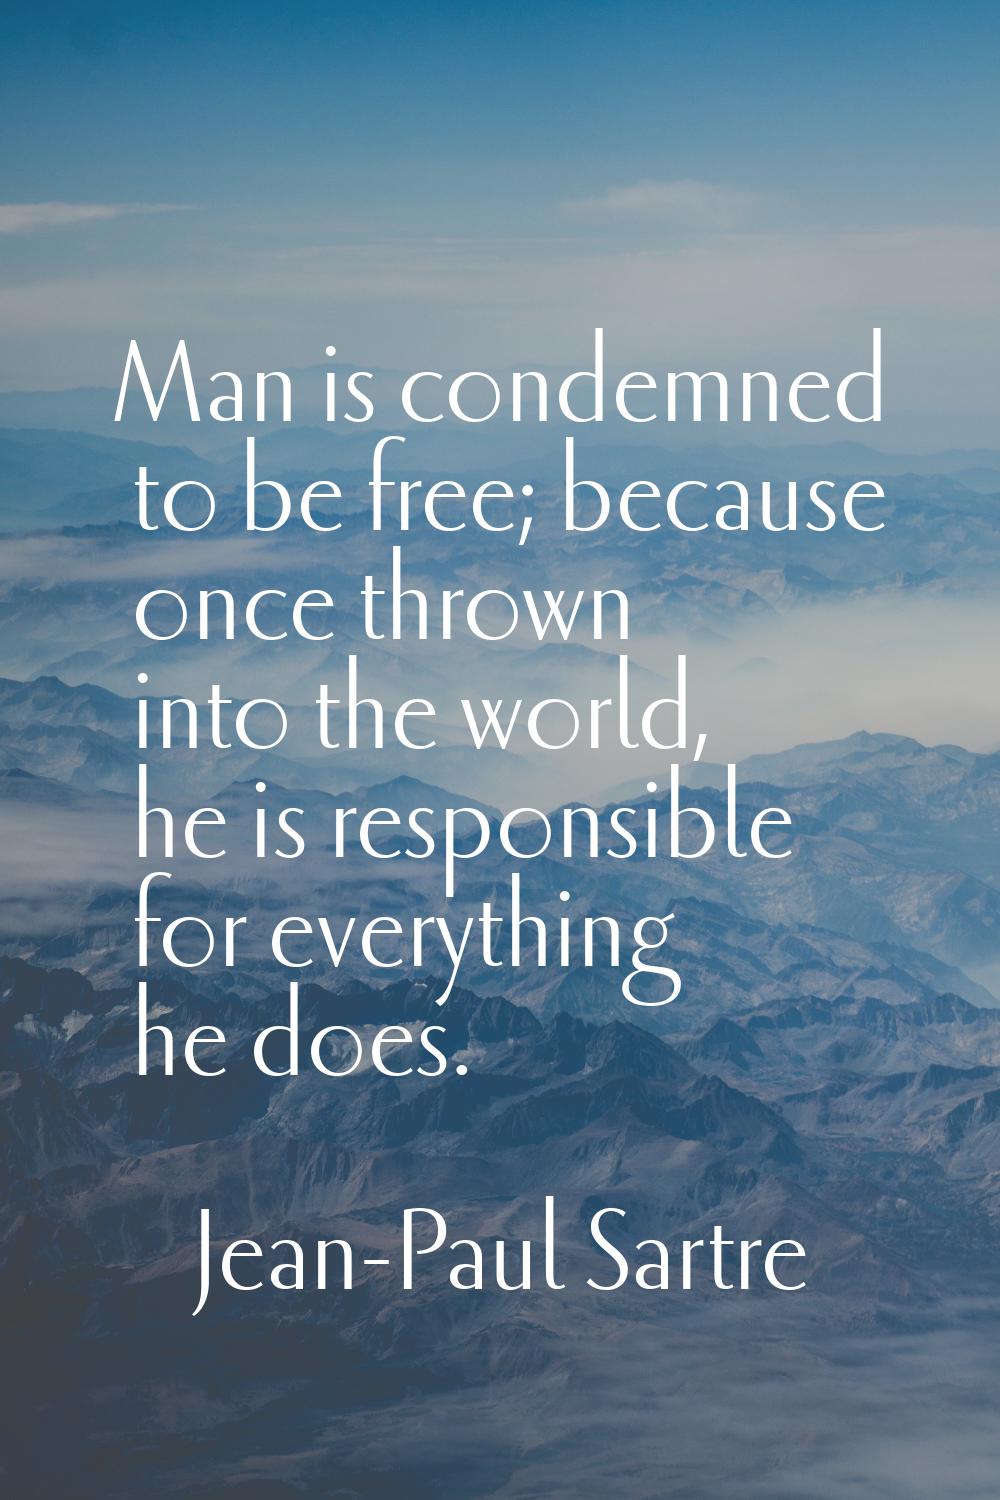 Man is condemned to be free; because once thrown into the world, he is responsible for everything h